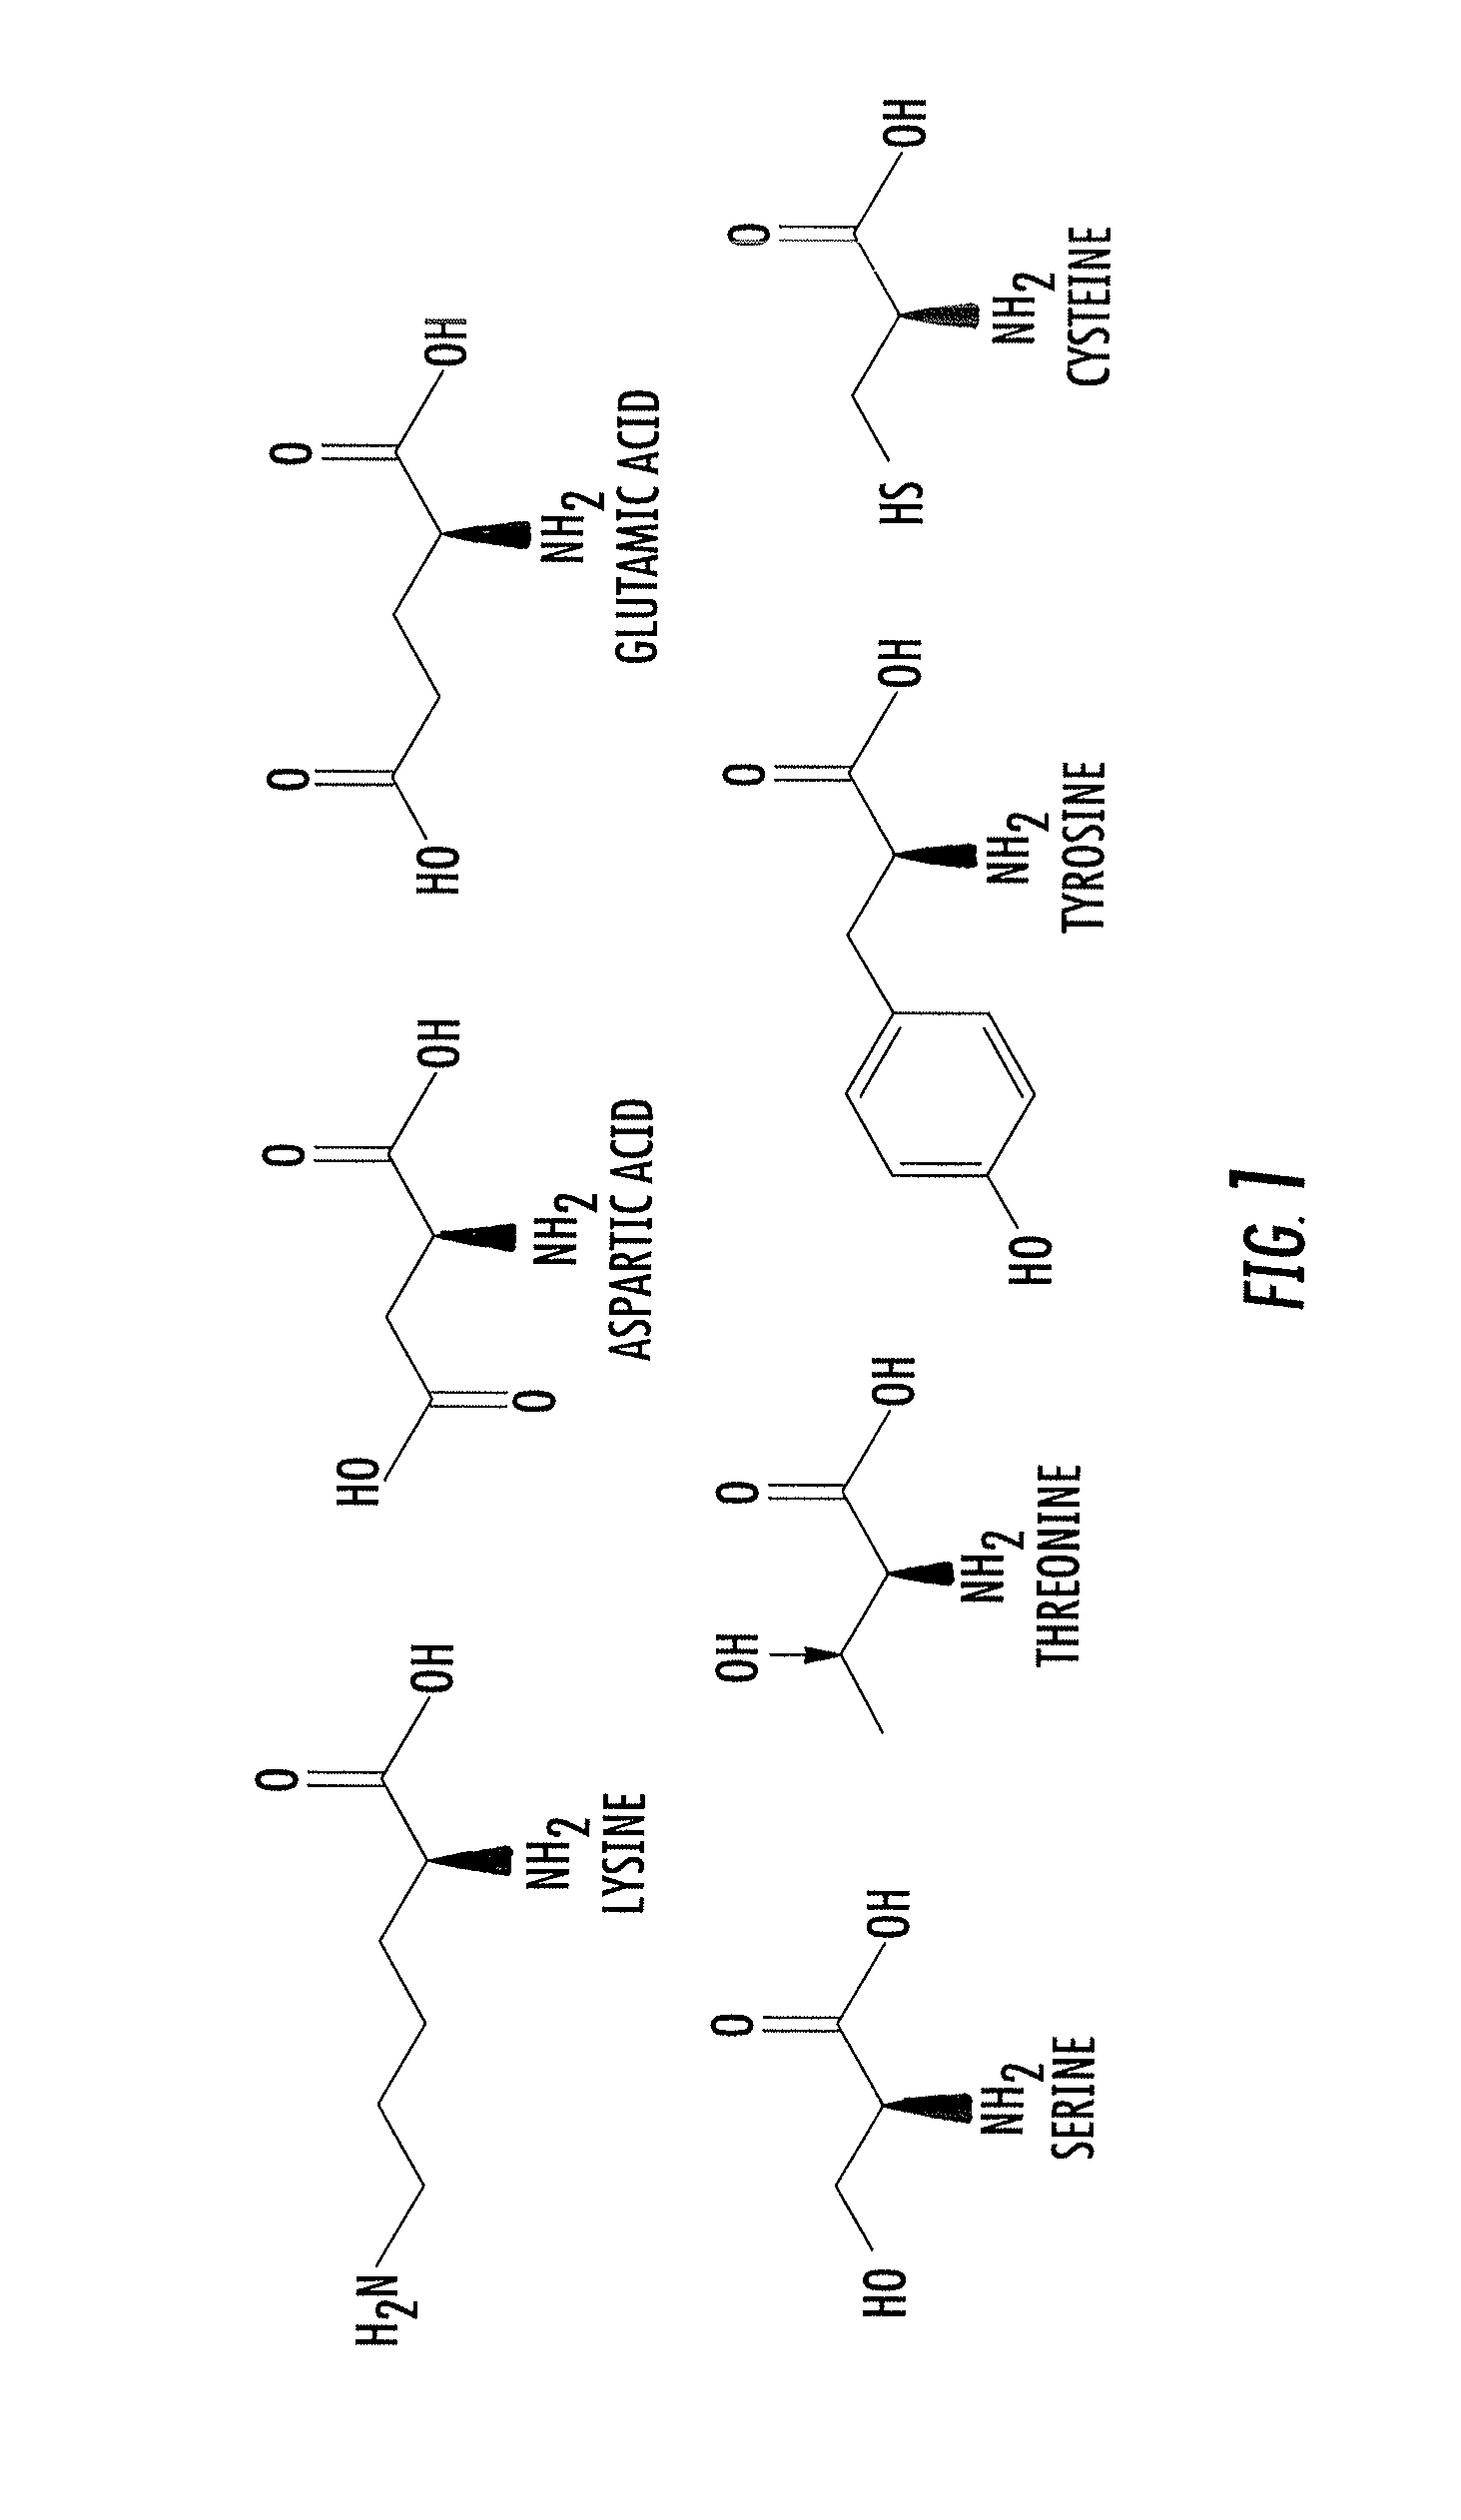 Asymmetric biofunctional silyl monomers and particles thereof as prodrugs and delivery vehicles for pharmaceutical, chemical and biological agents